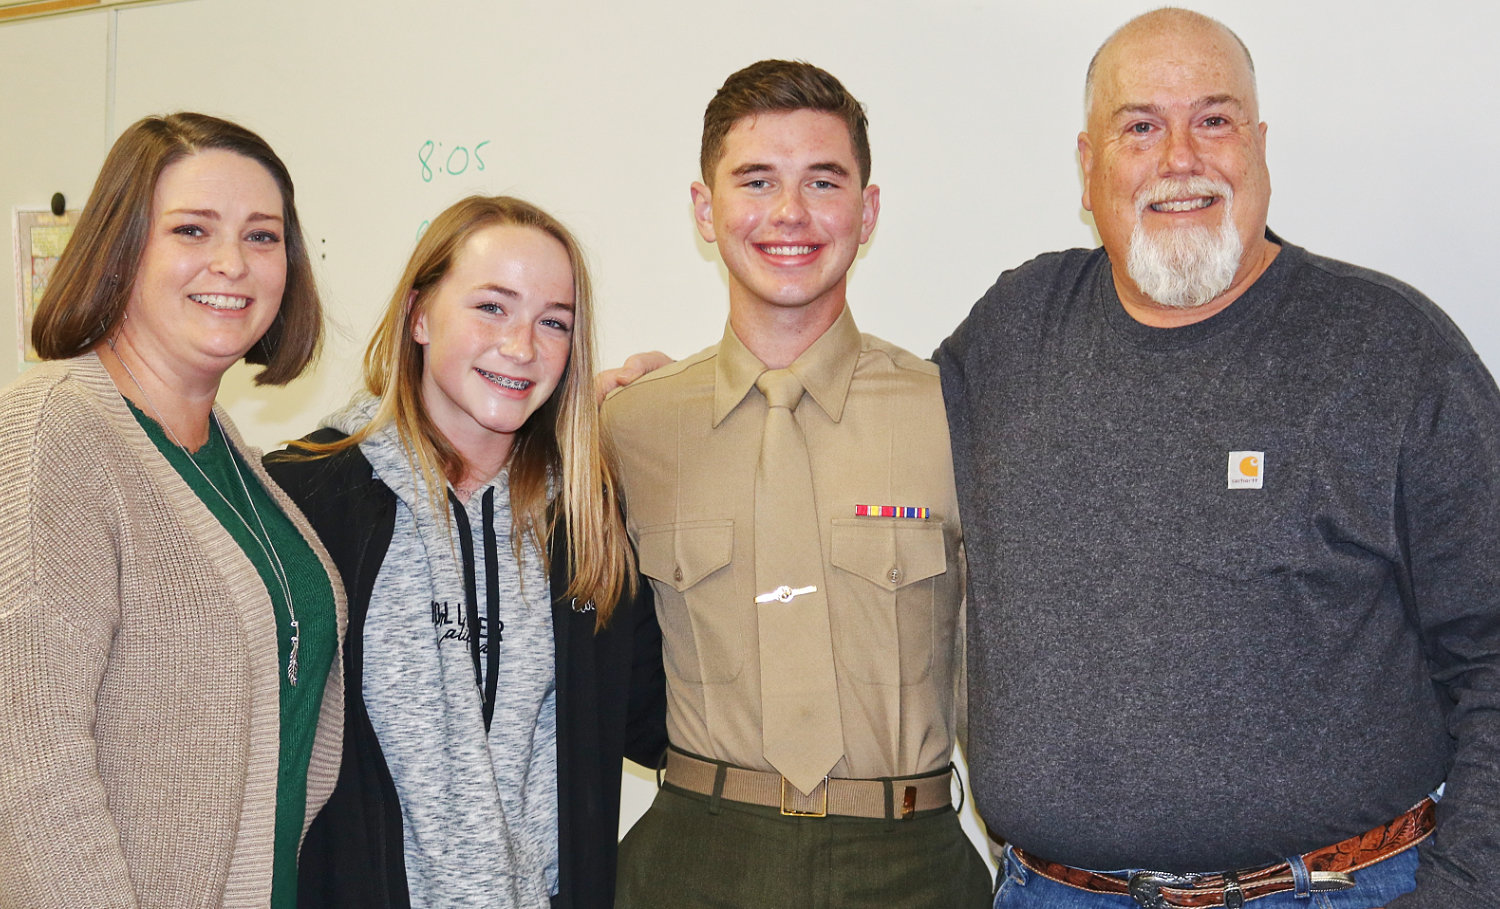 The Herring family got a nice surprise Monday when Quitman grad and Marine Tobie Herring paid a visit to his dad, John, and sister, Elizabeth in their respective classes at Quitman High School. In on the surprise was step-mom Lindsey.